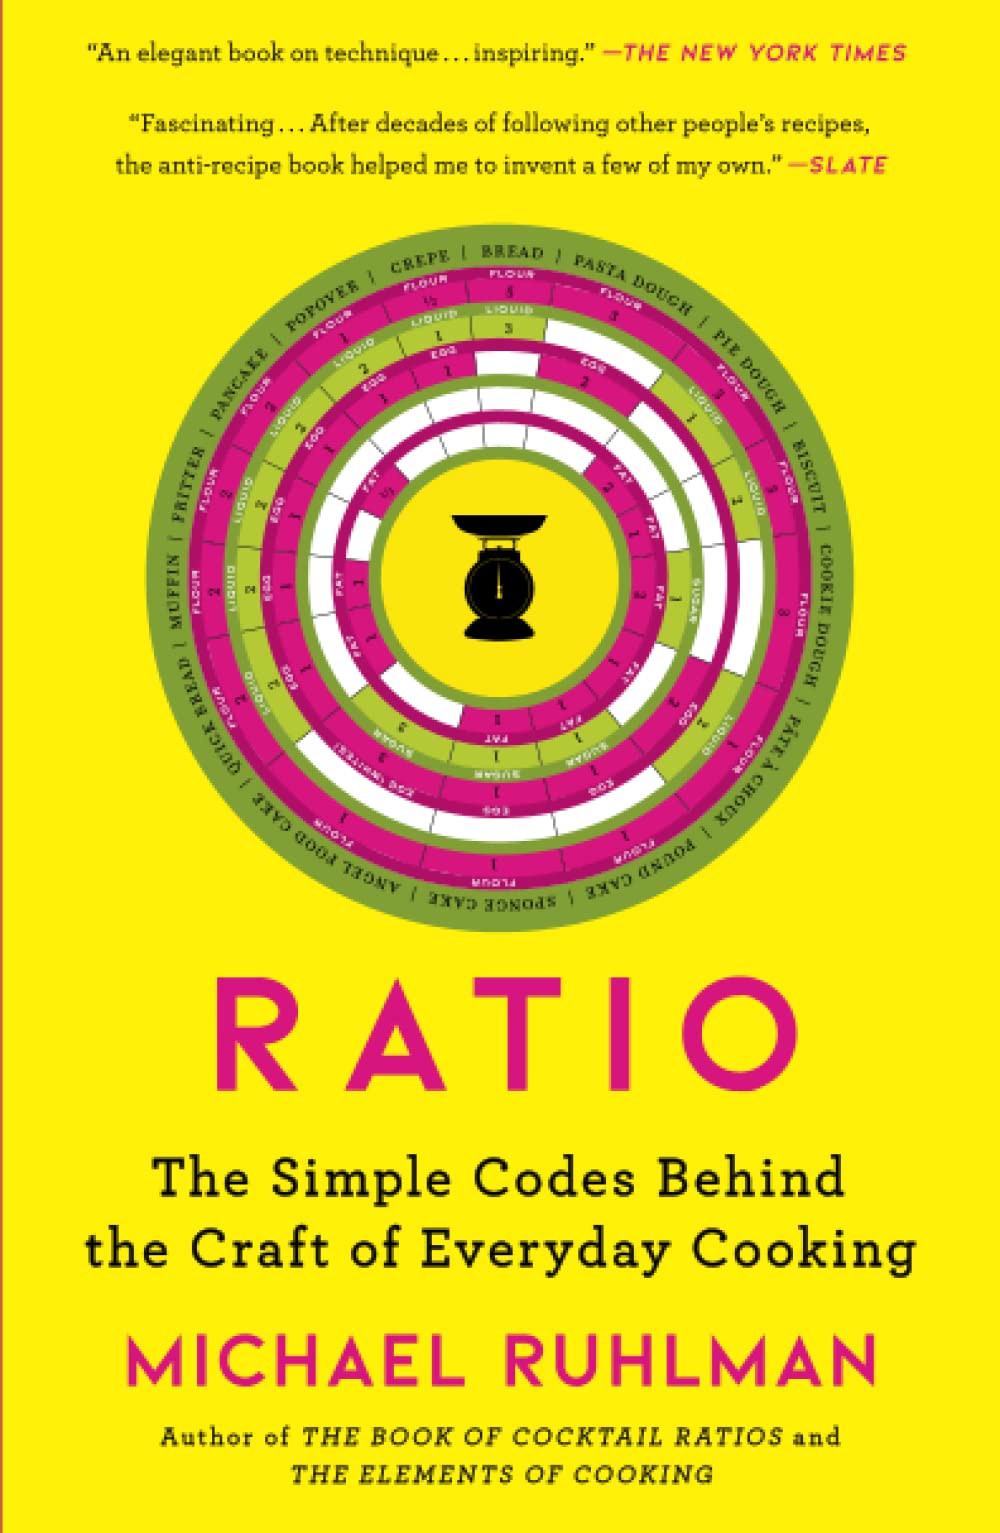 Ratio: The Simple Codes Behind the Craft of Everyday Cooking (Michael Ruhlman)